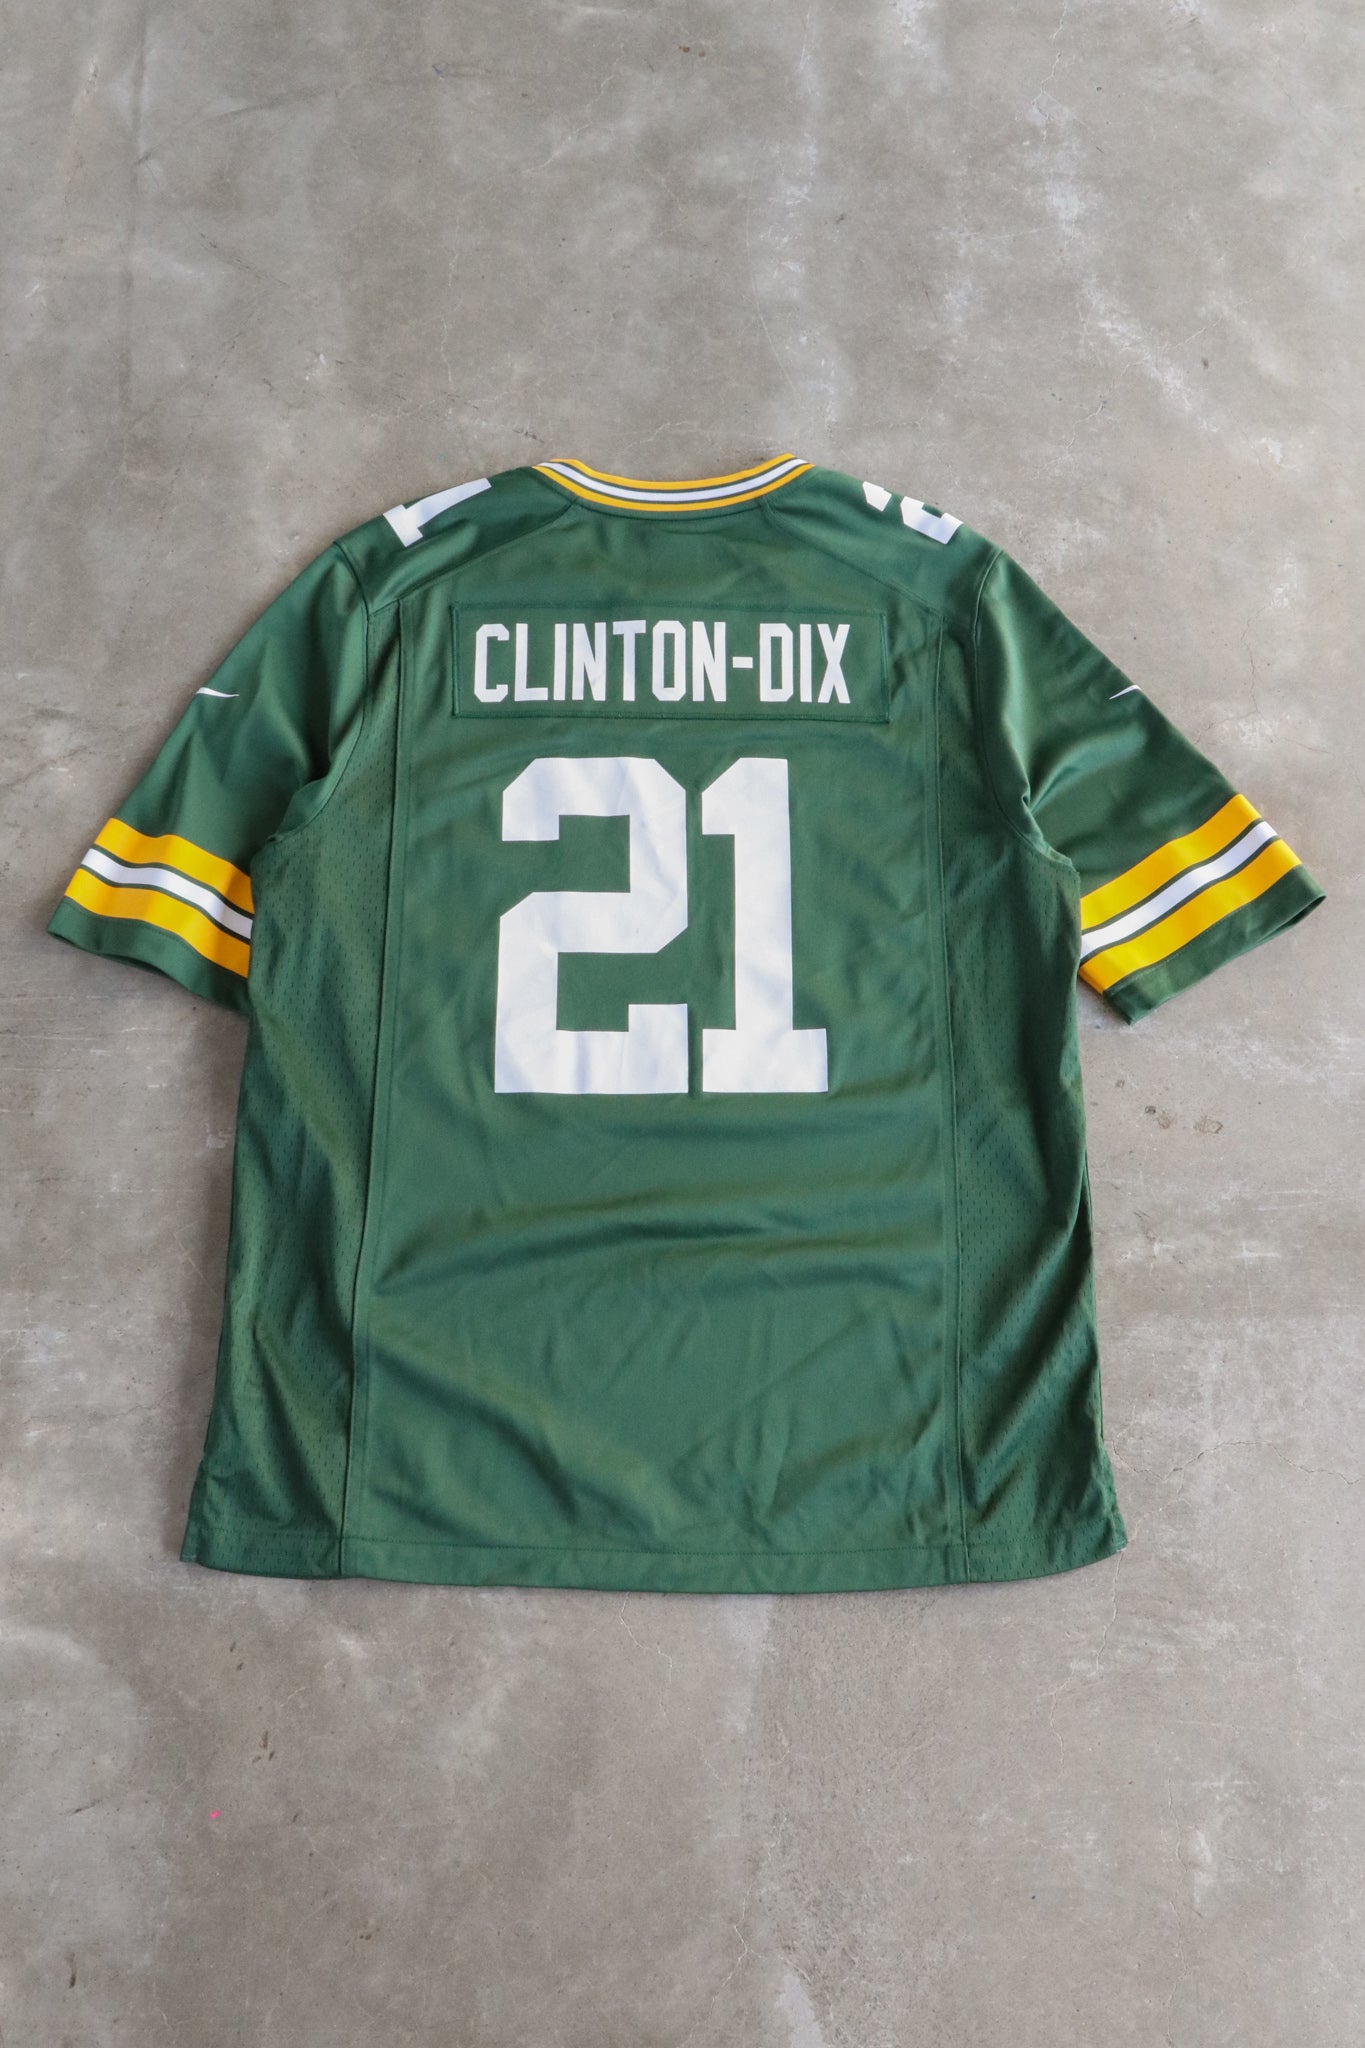 Vintage NFL Green Bay Packers Clinton-Dix Jersey Large